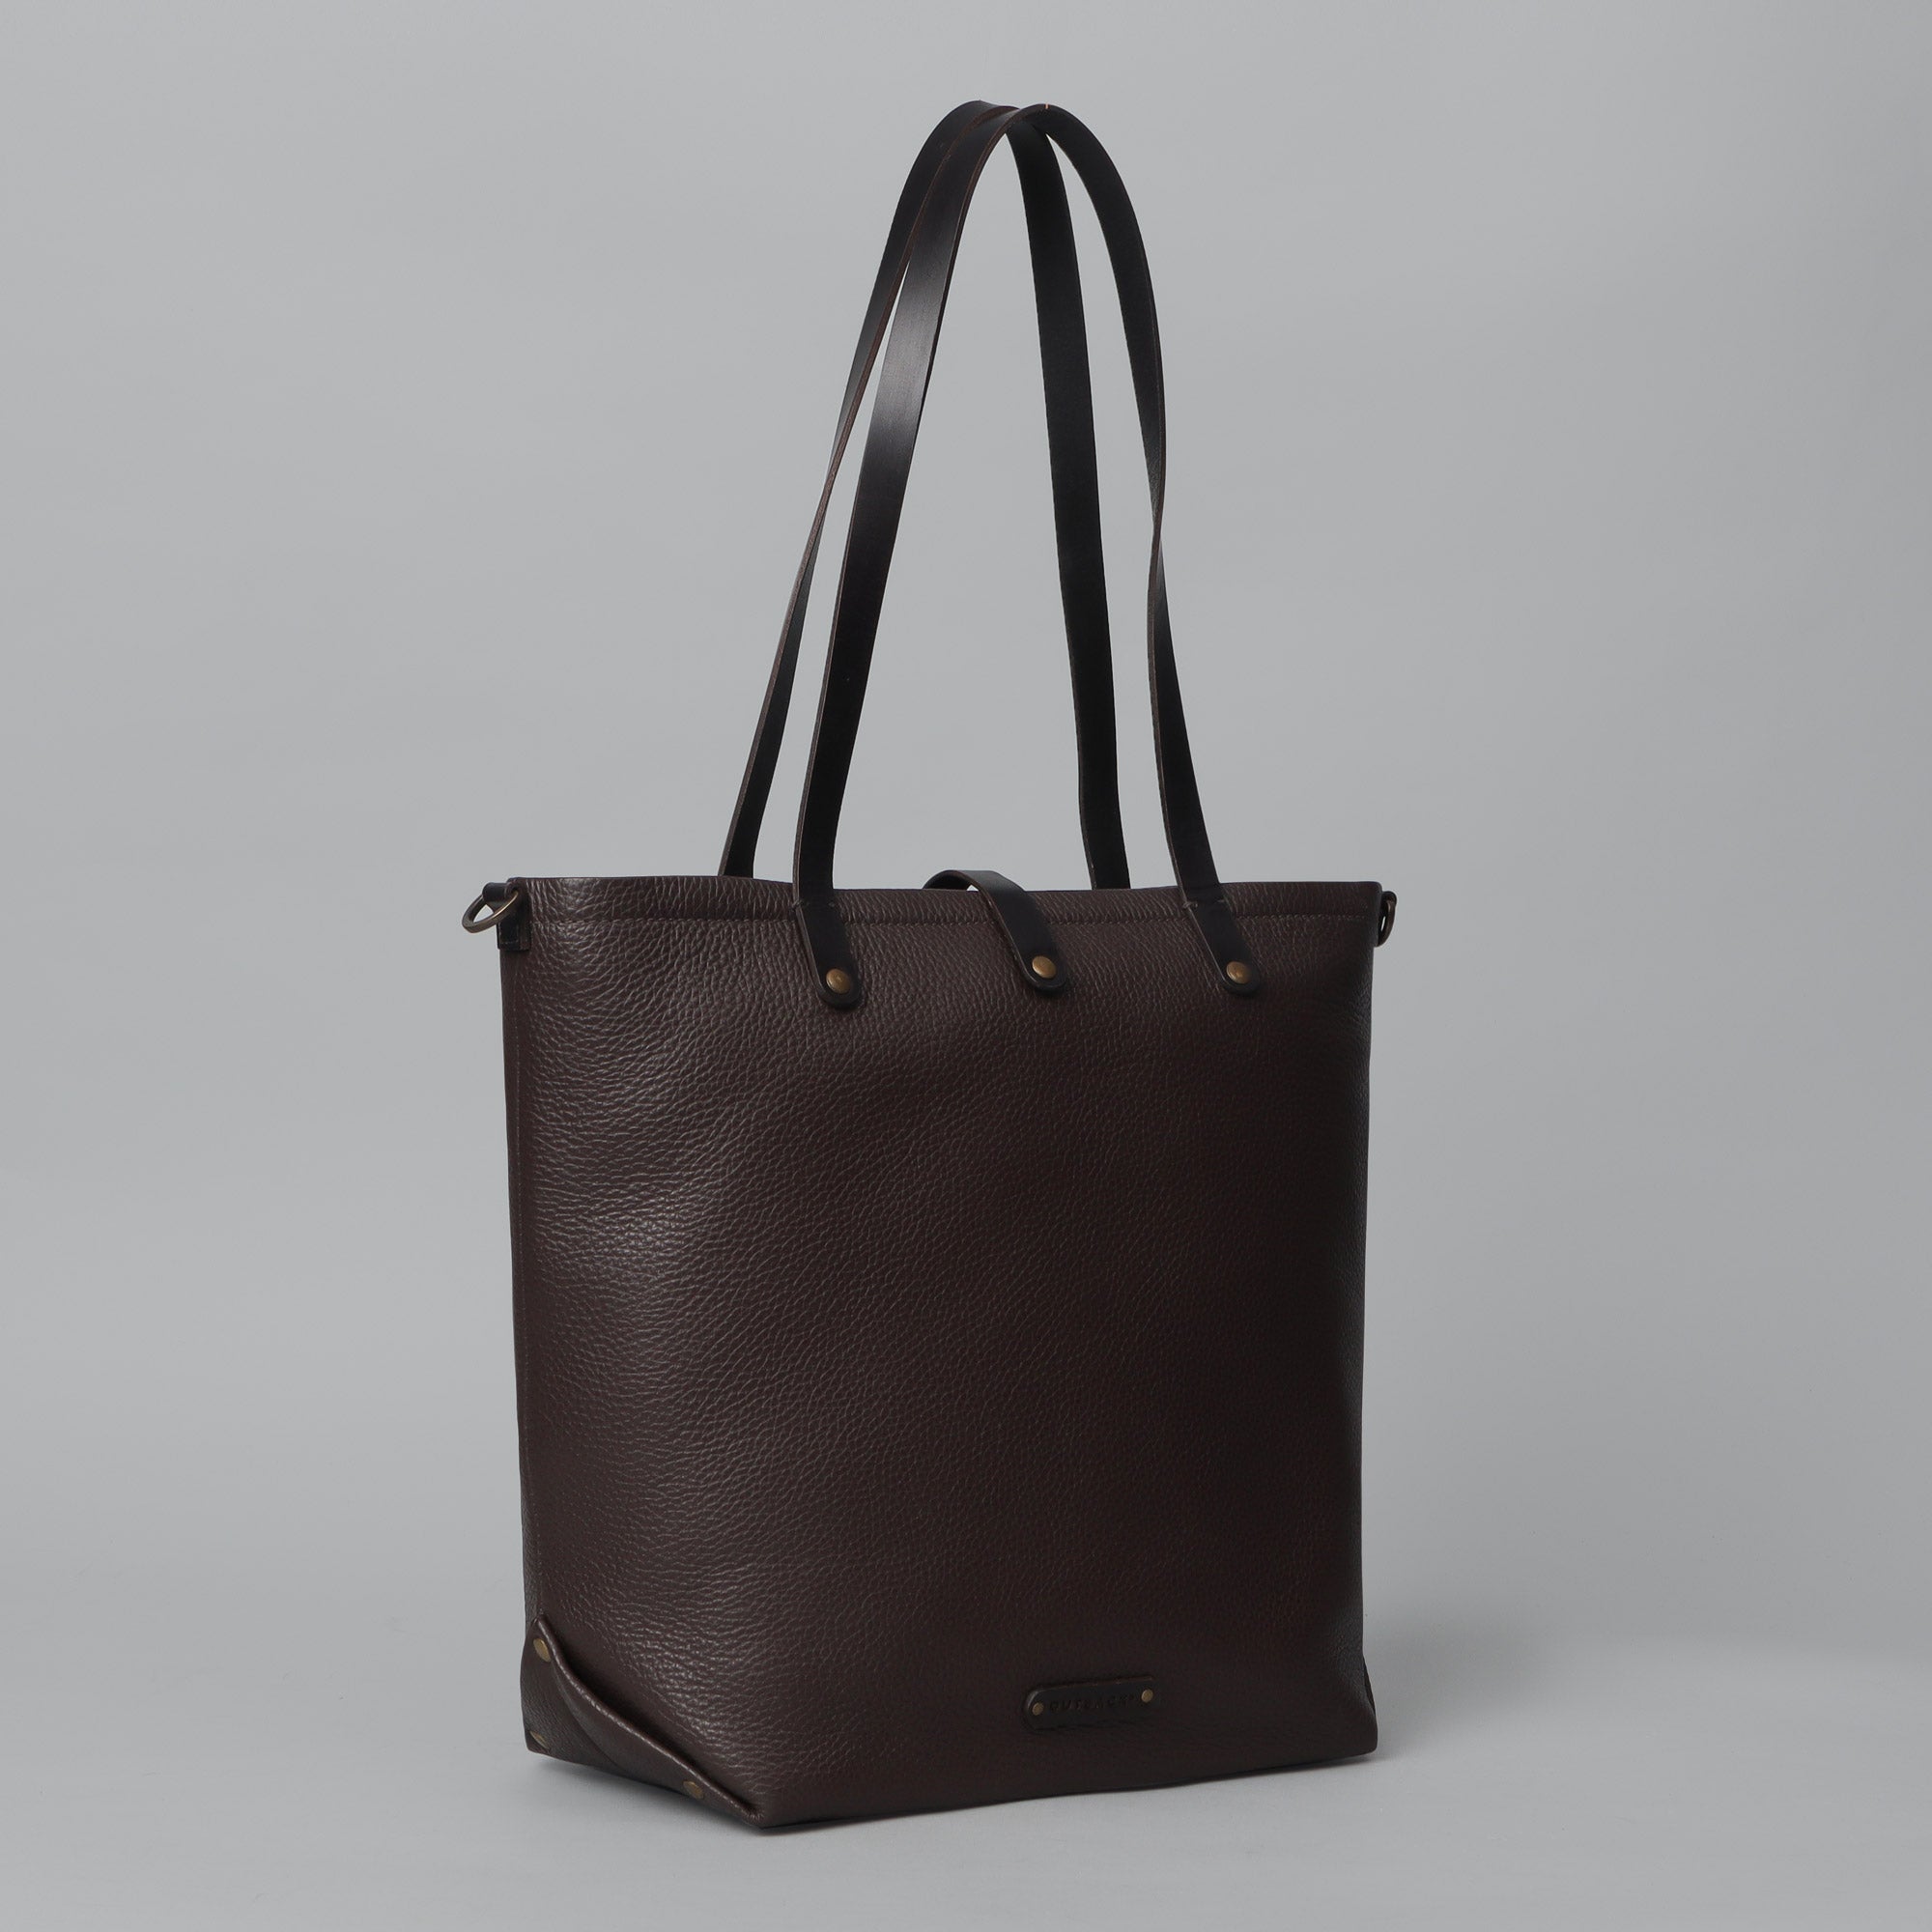 Brown leather canvas tote for women